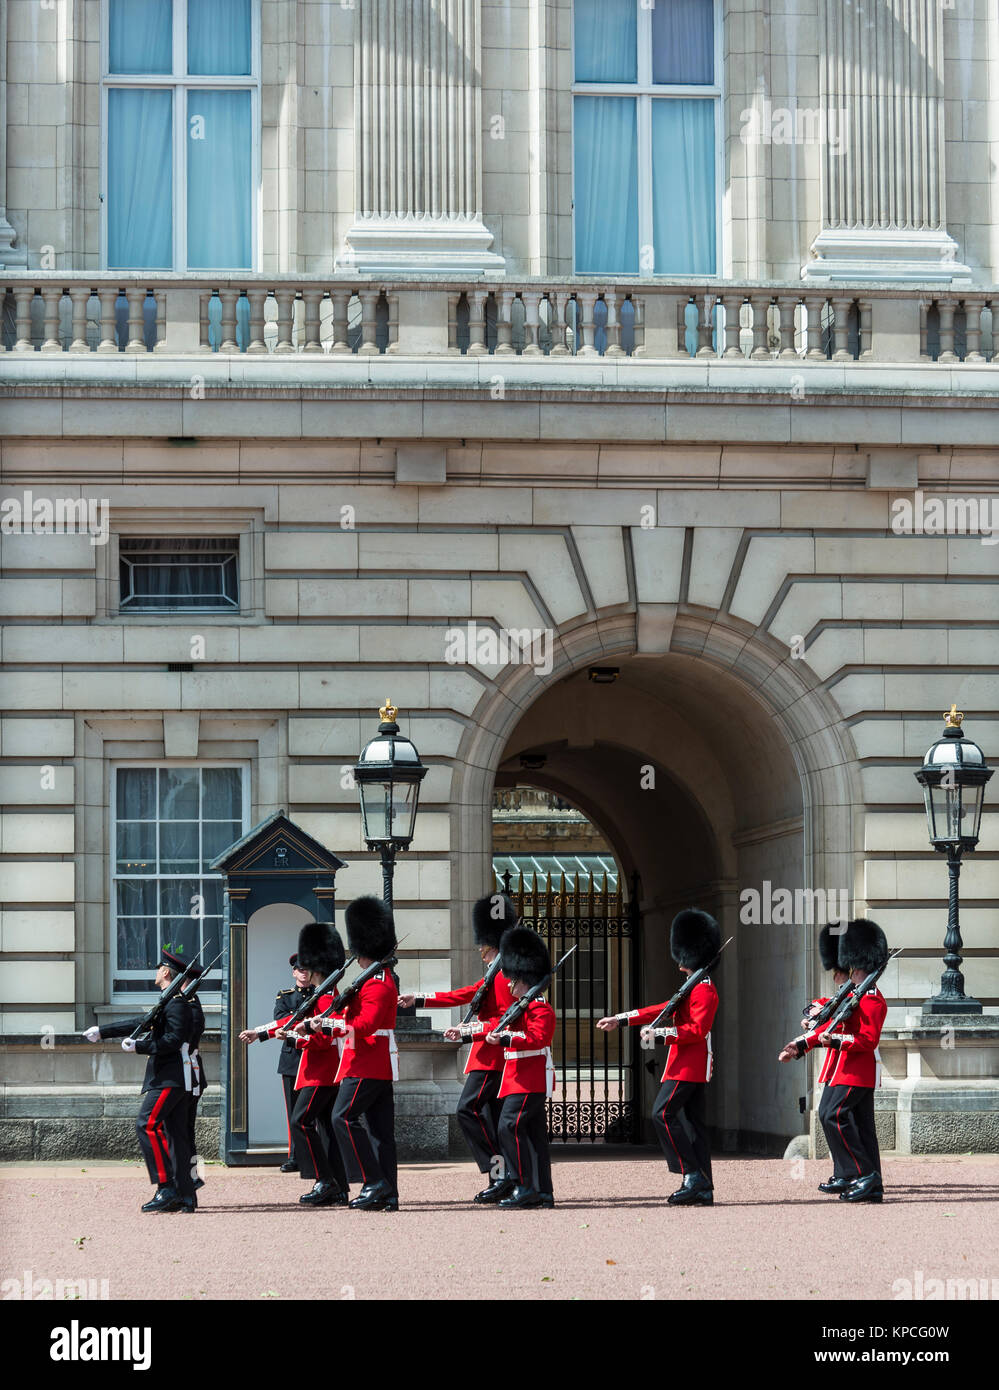 Guardsmen of the Royal Guard with bearskin cap, Changing of the Guard, Traditional Changing, Buckingham Palace, London, England Stock Photo